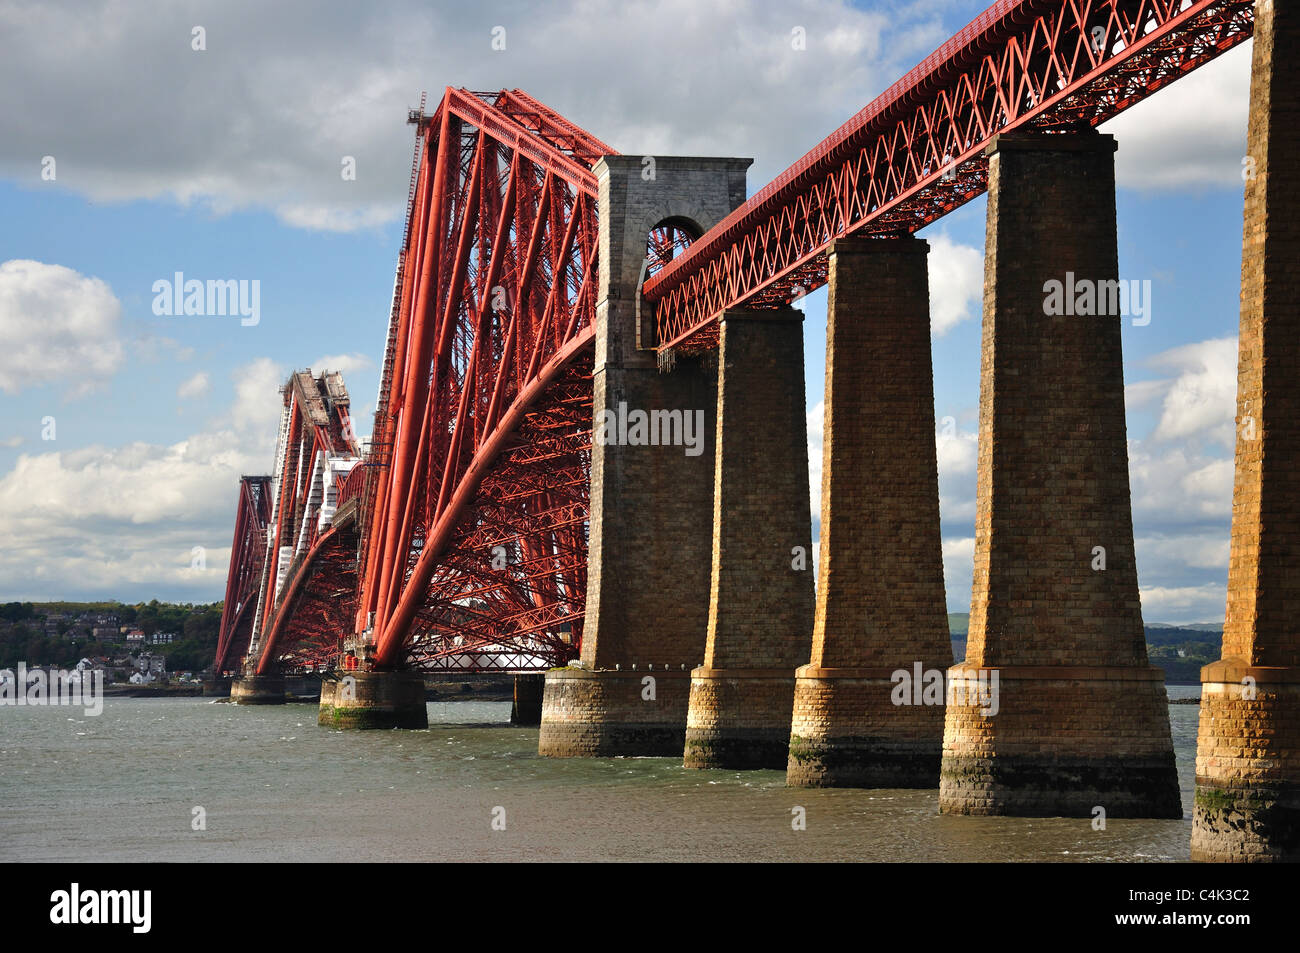 Le Forth Bridge de South Queensferry, Firth of Forth, Lothian, Ecosse, Royaume-Uni Banque D'Images